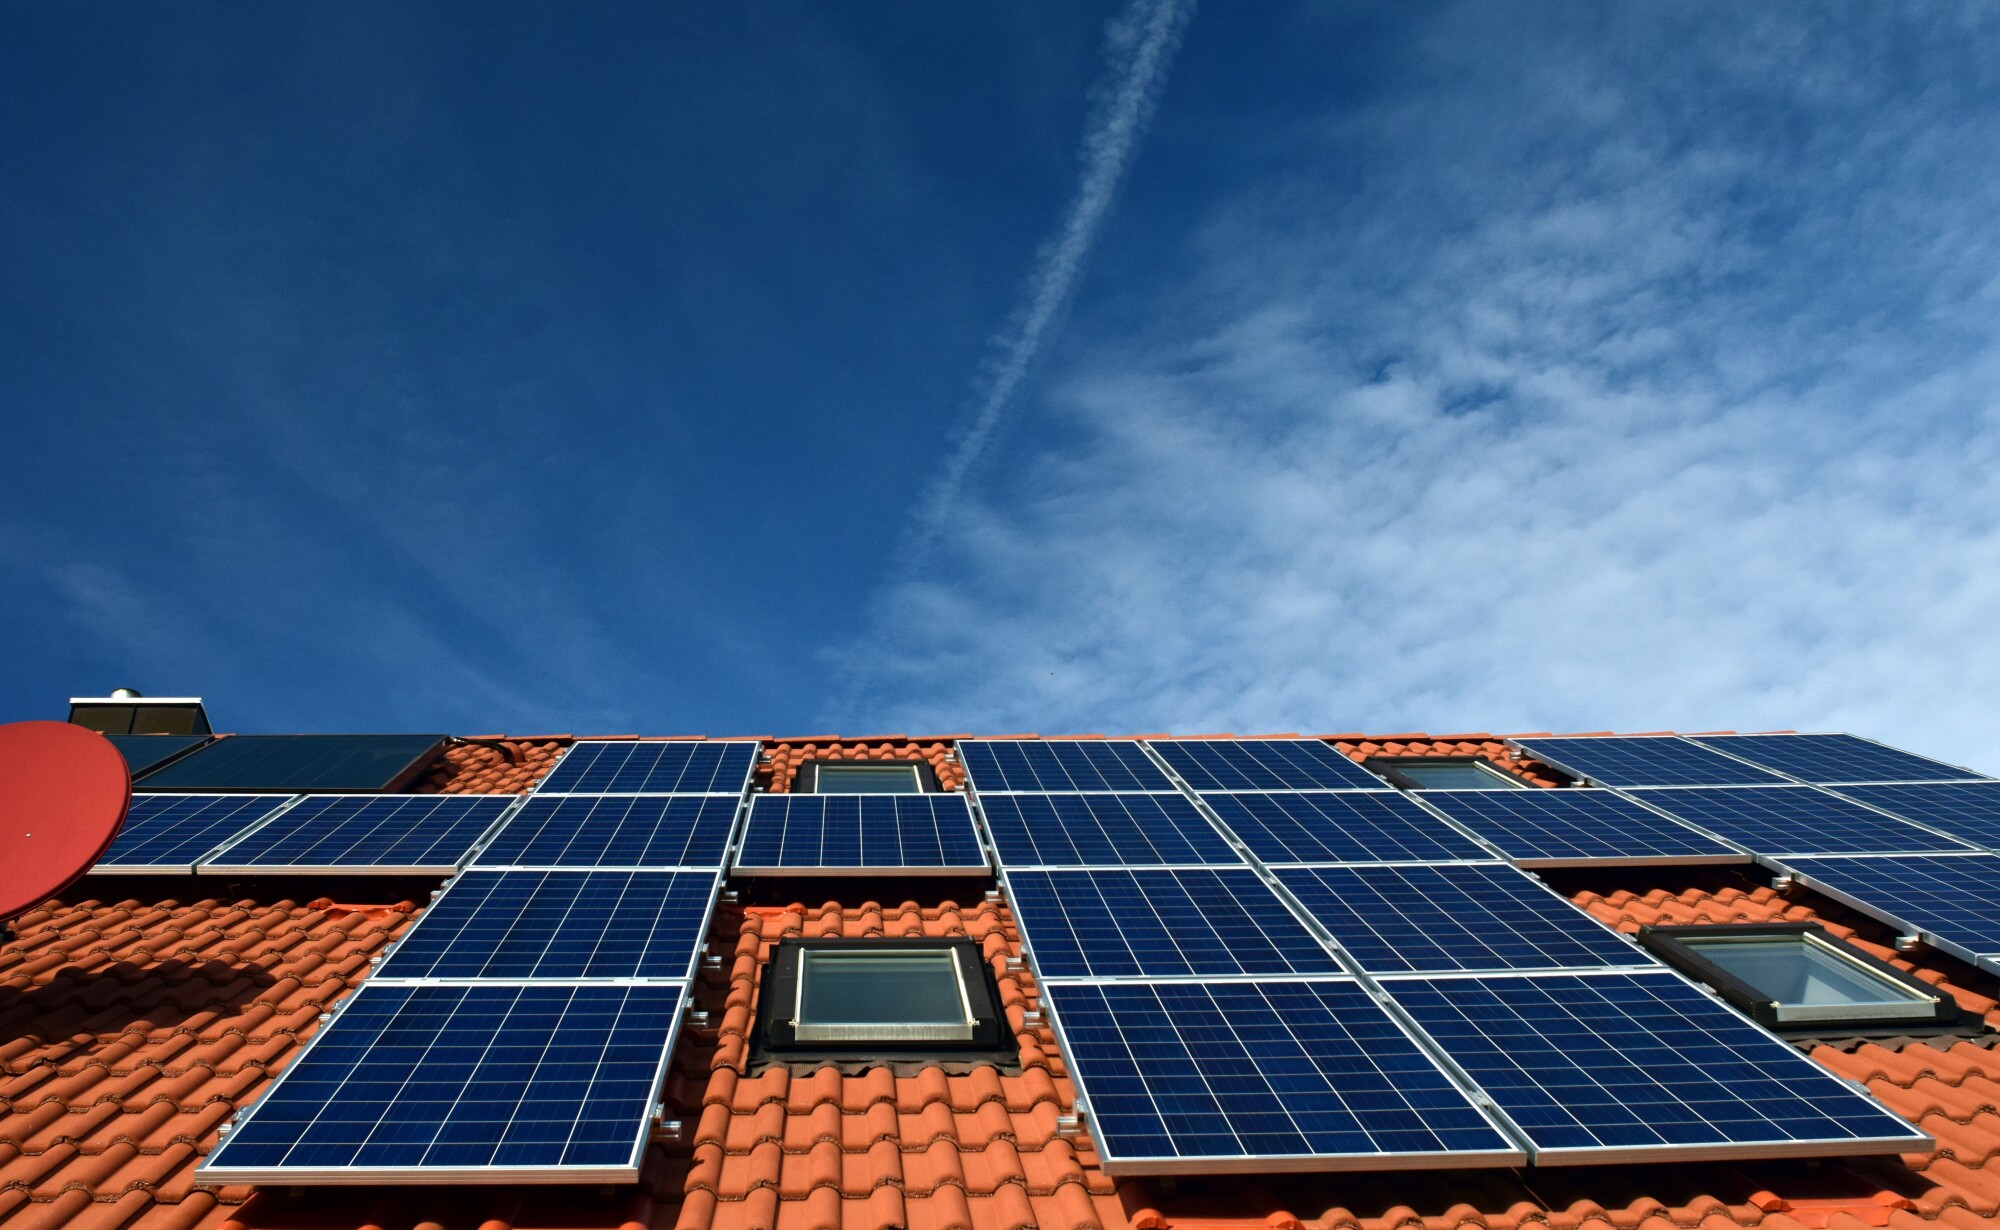 There are several types of solar panels that you have to choose from for your home. Learn more about your options by clicking here.